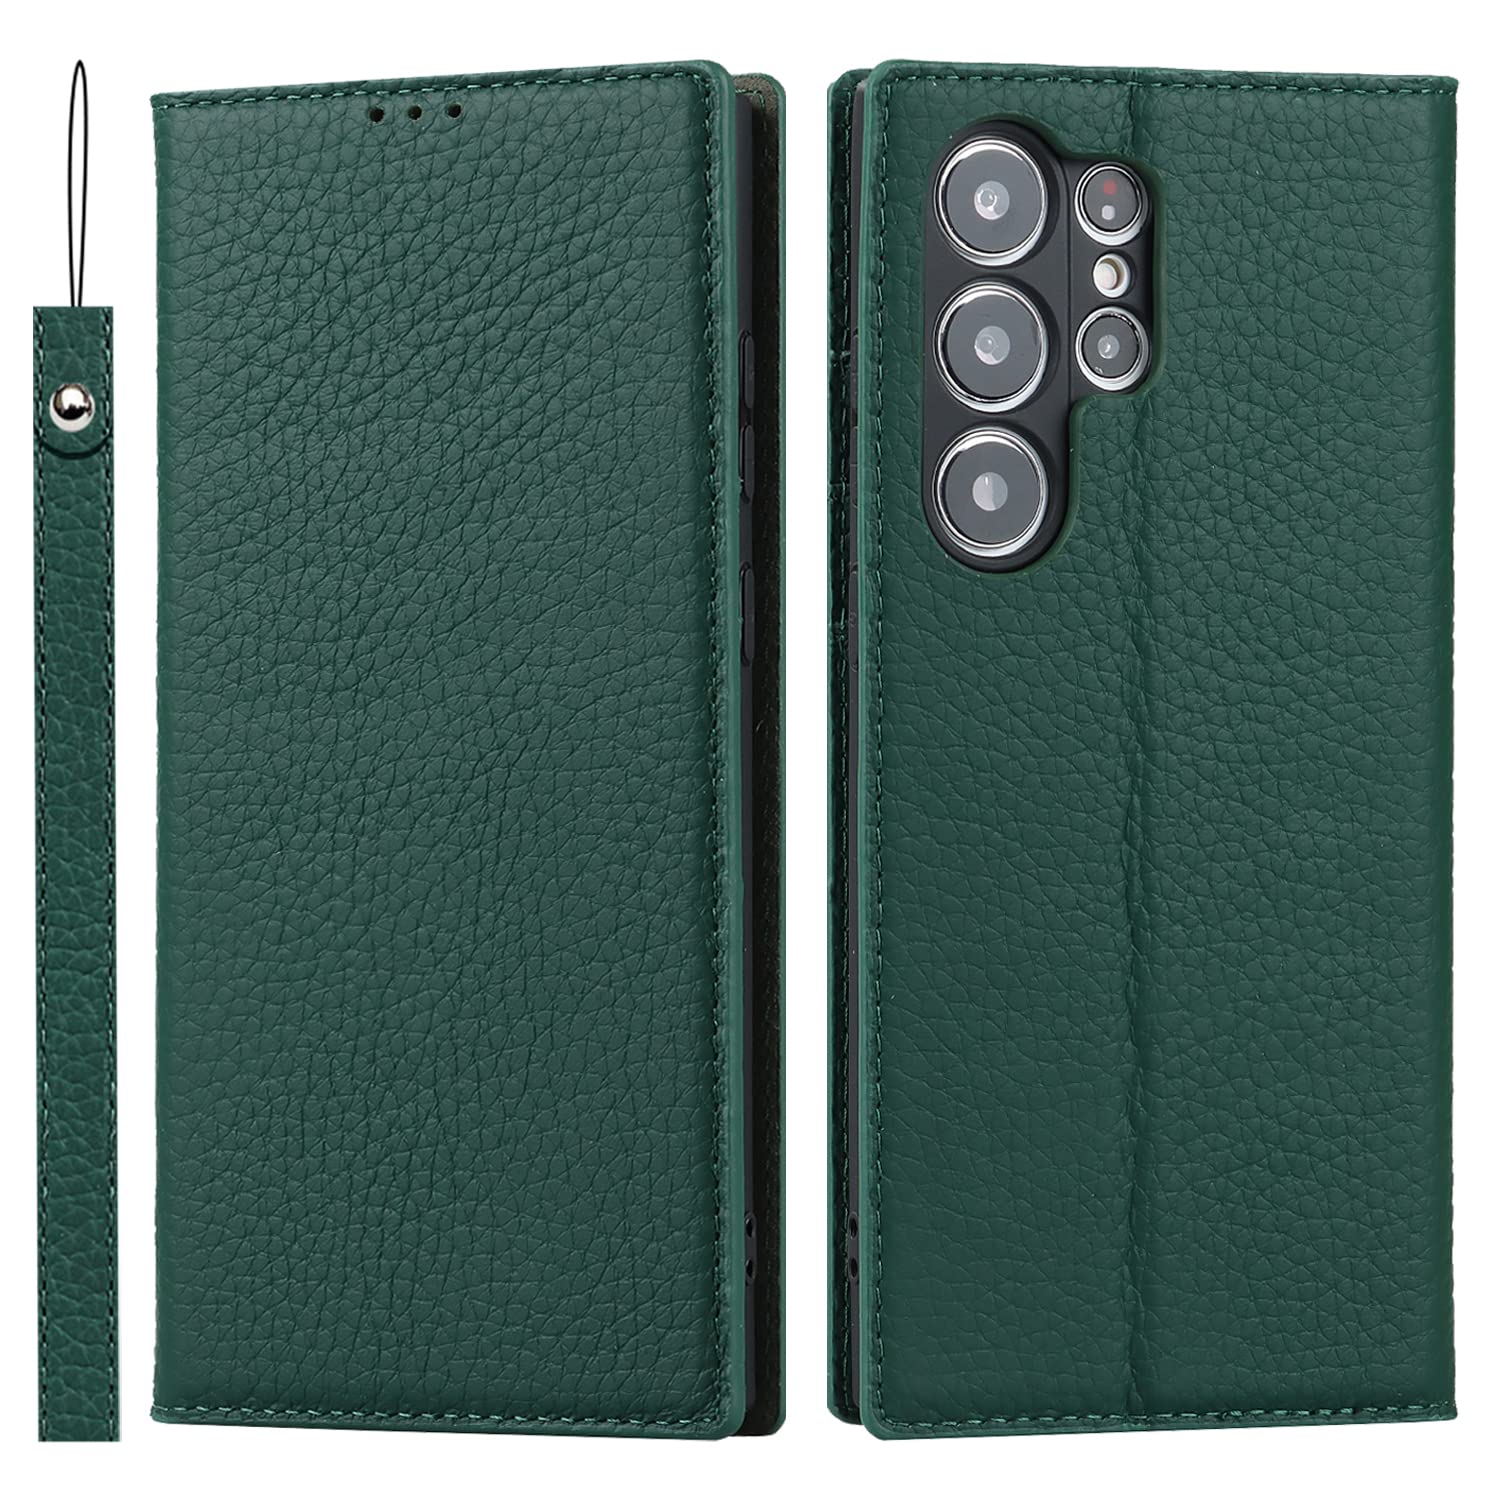 Ｈａｖａｙａ for Samsung Galaxy S23 Ultra Case Wallet Genuine Leather,for Samsung Galaxy S23 Ultra Wallet Case with Card Holder for Women,flip Phone case with Credit Slots-Dark Green